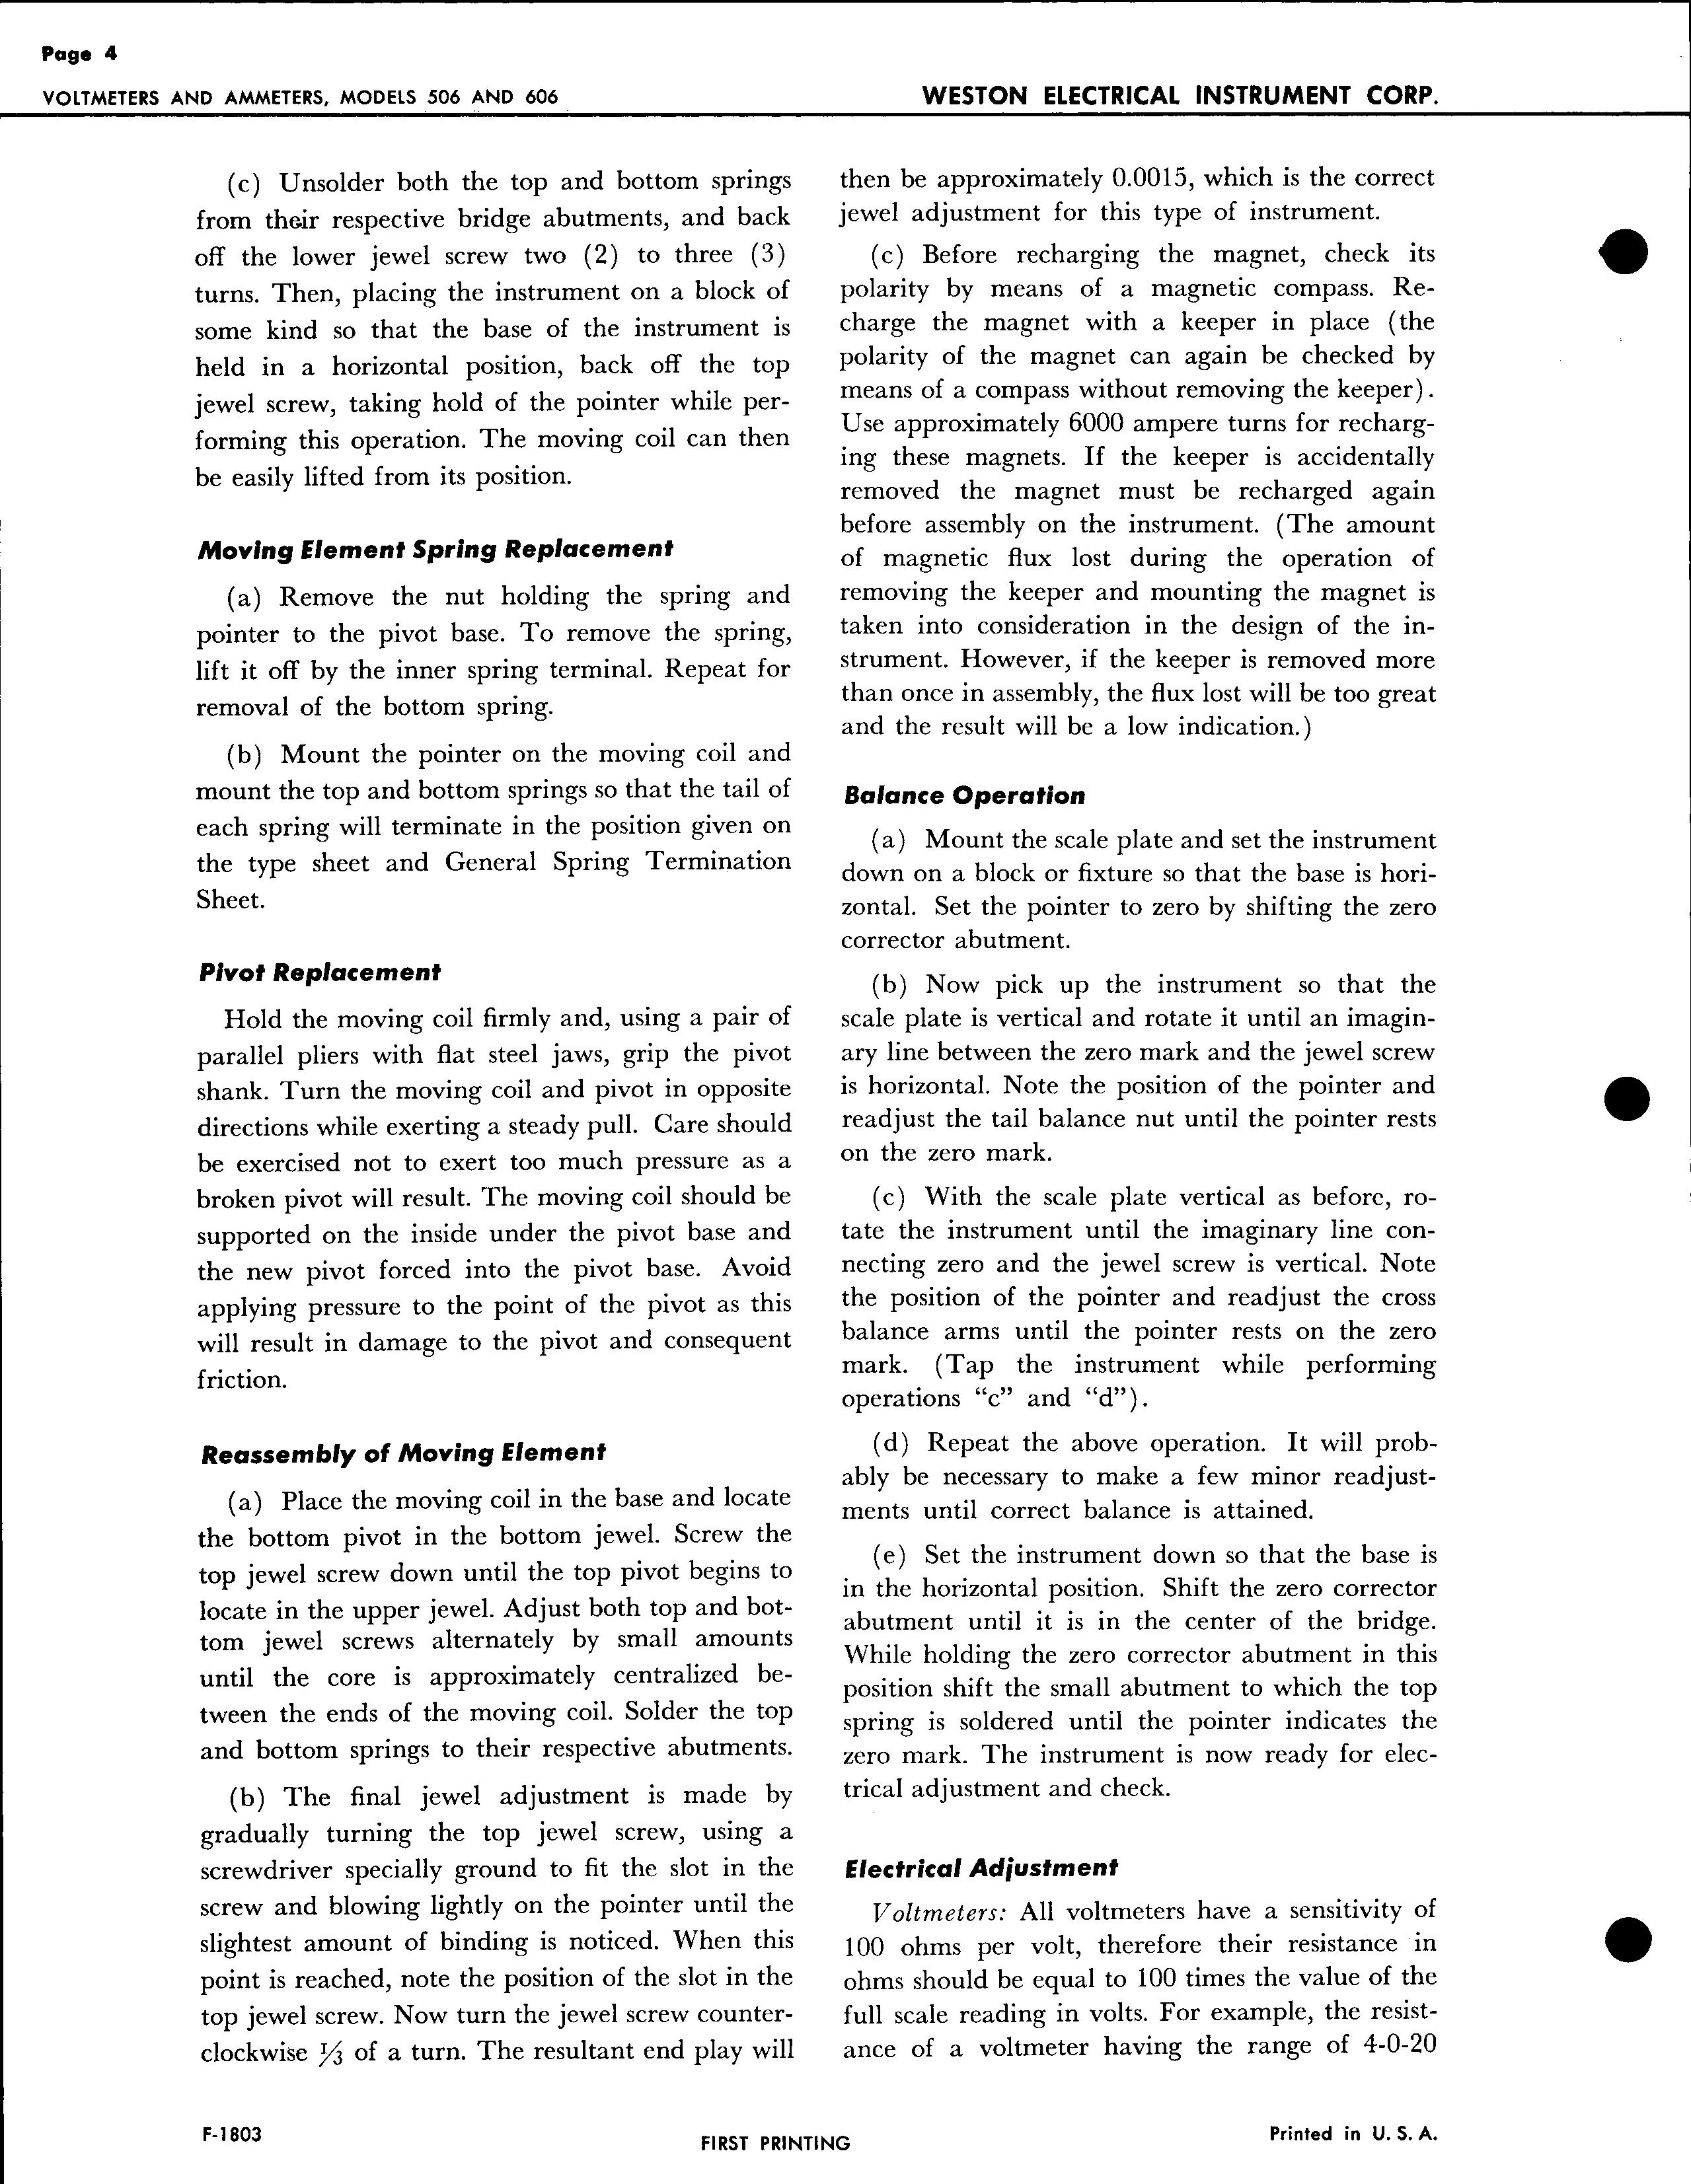 Sample page 4 from AirCorps Library document: Service Instructions for Models 506 & 606 Voltmeters and Ammeters